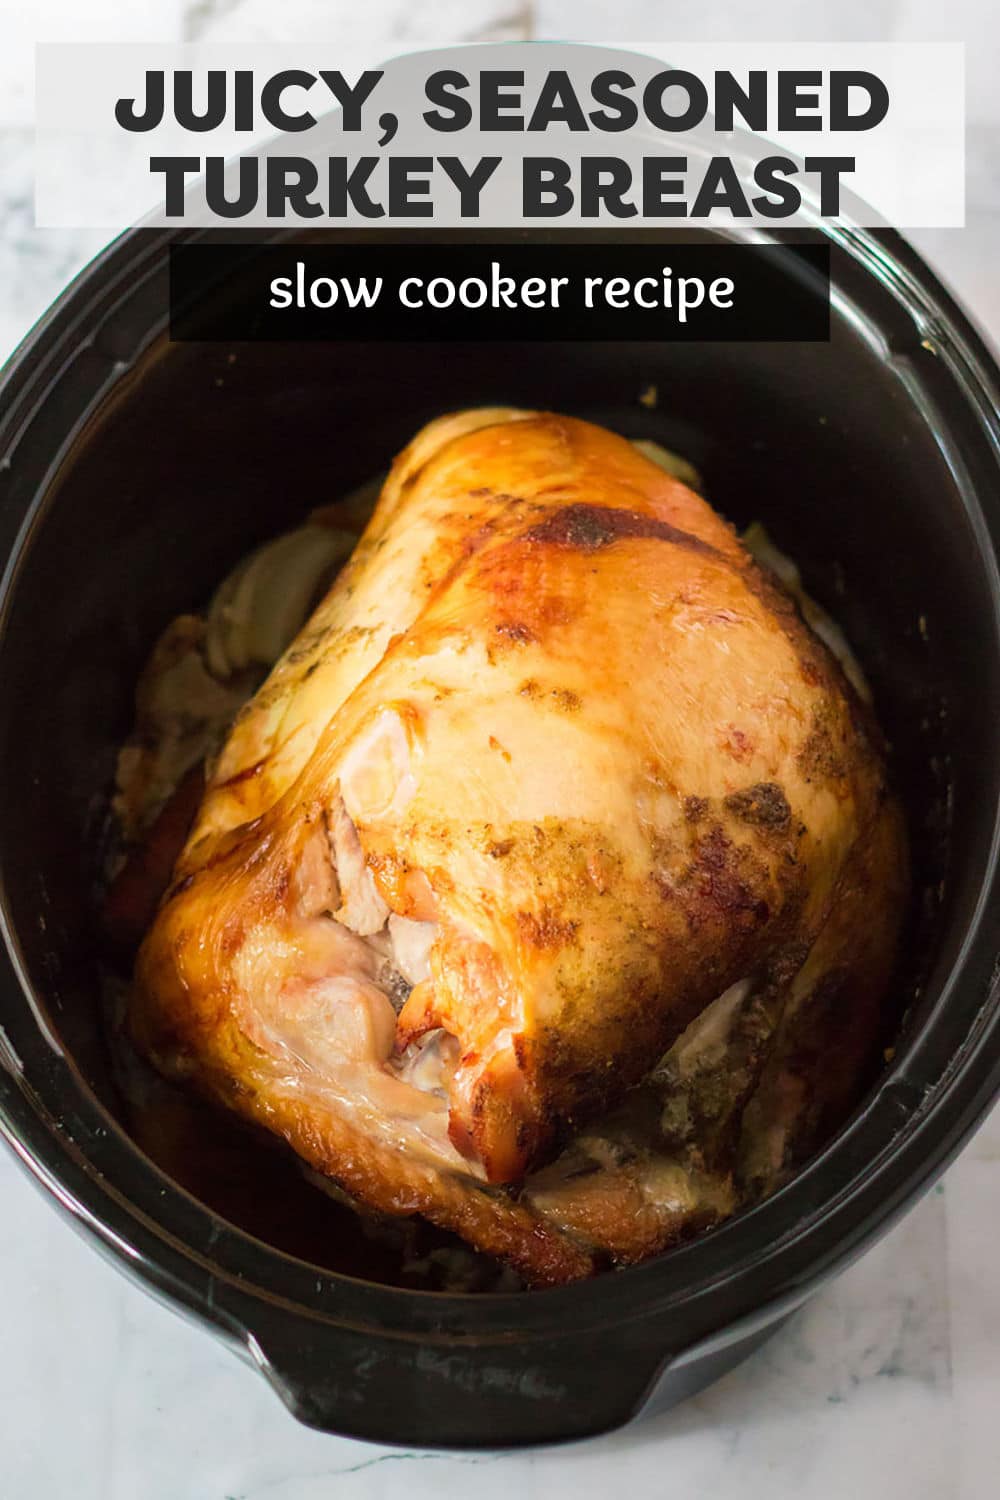 Tender and juicy Slow Cooker Turkey Breast is the easiest way to prepare a bone-in turkey breast right in your crockpot! | www.persnicketyplates.com